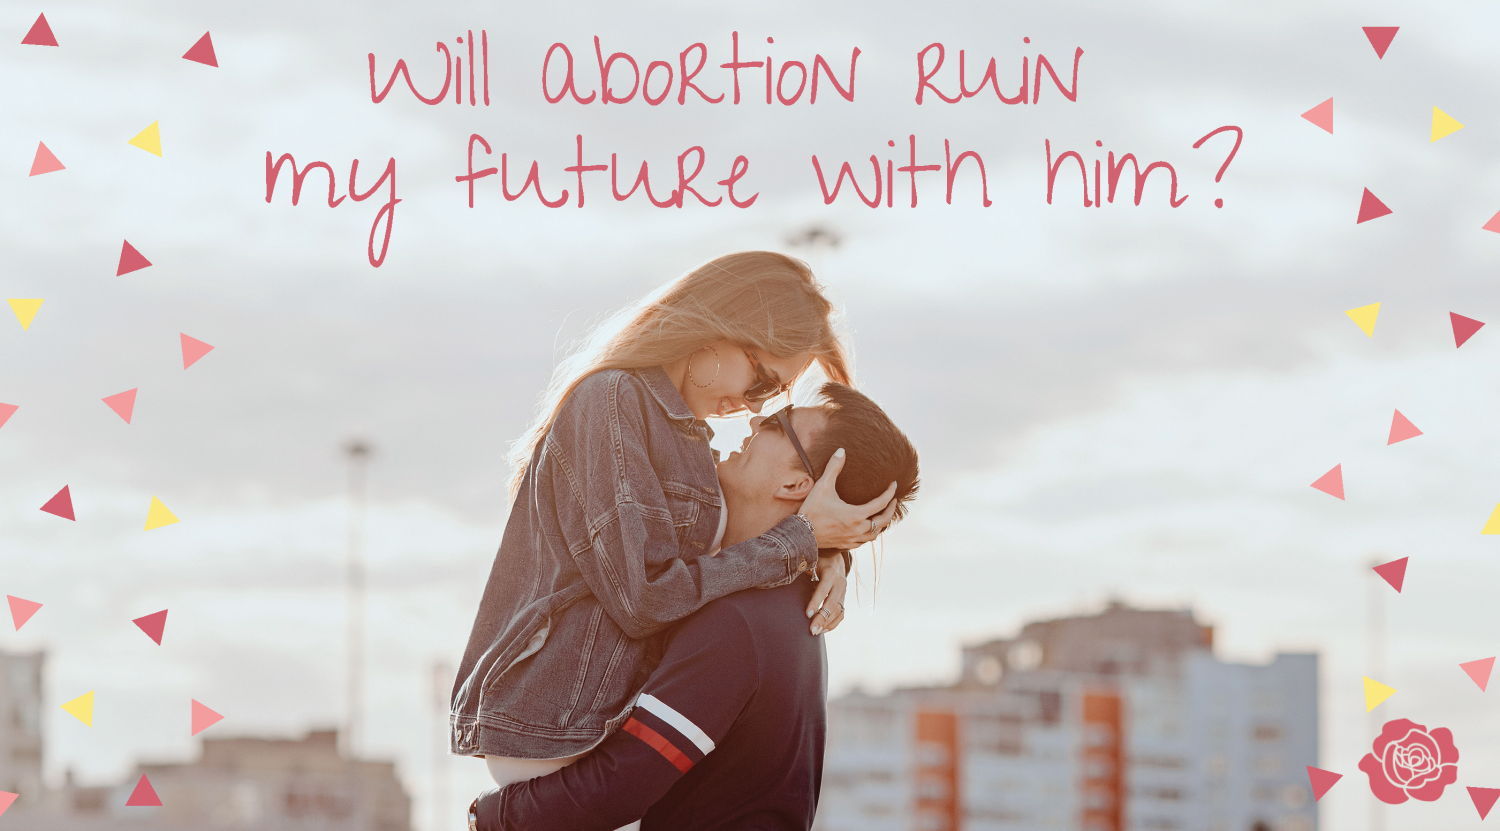 will abortion ruin my future with him